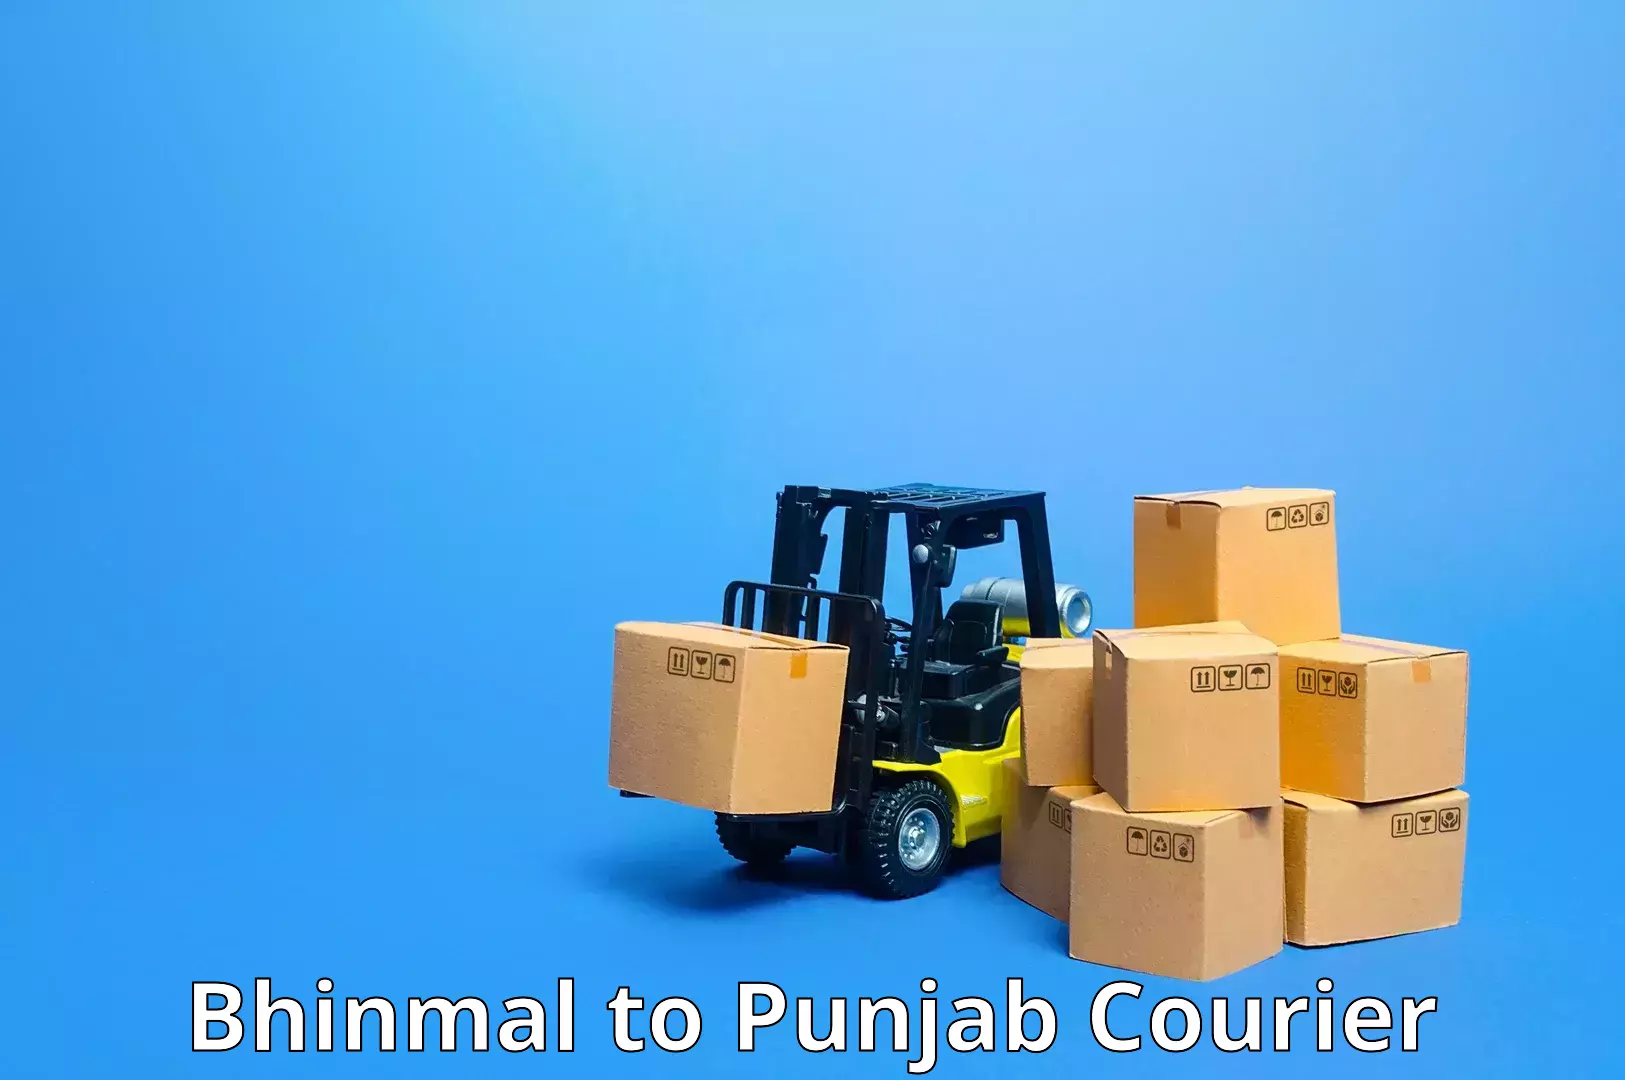 Enhanced shipping experience Bhinmal to Mohali